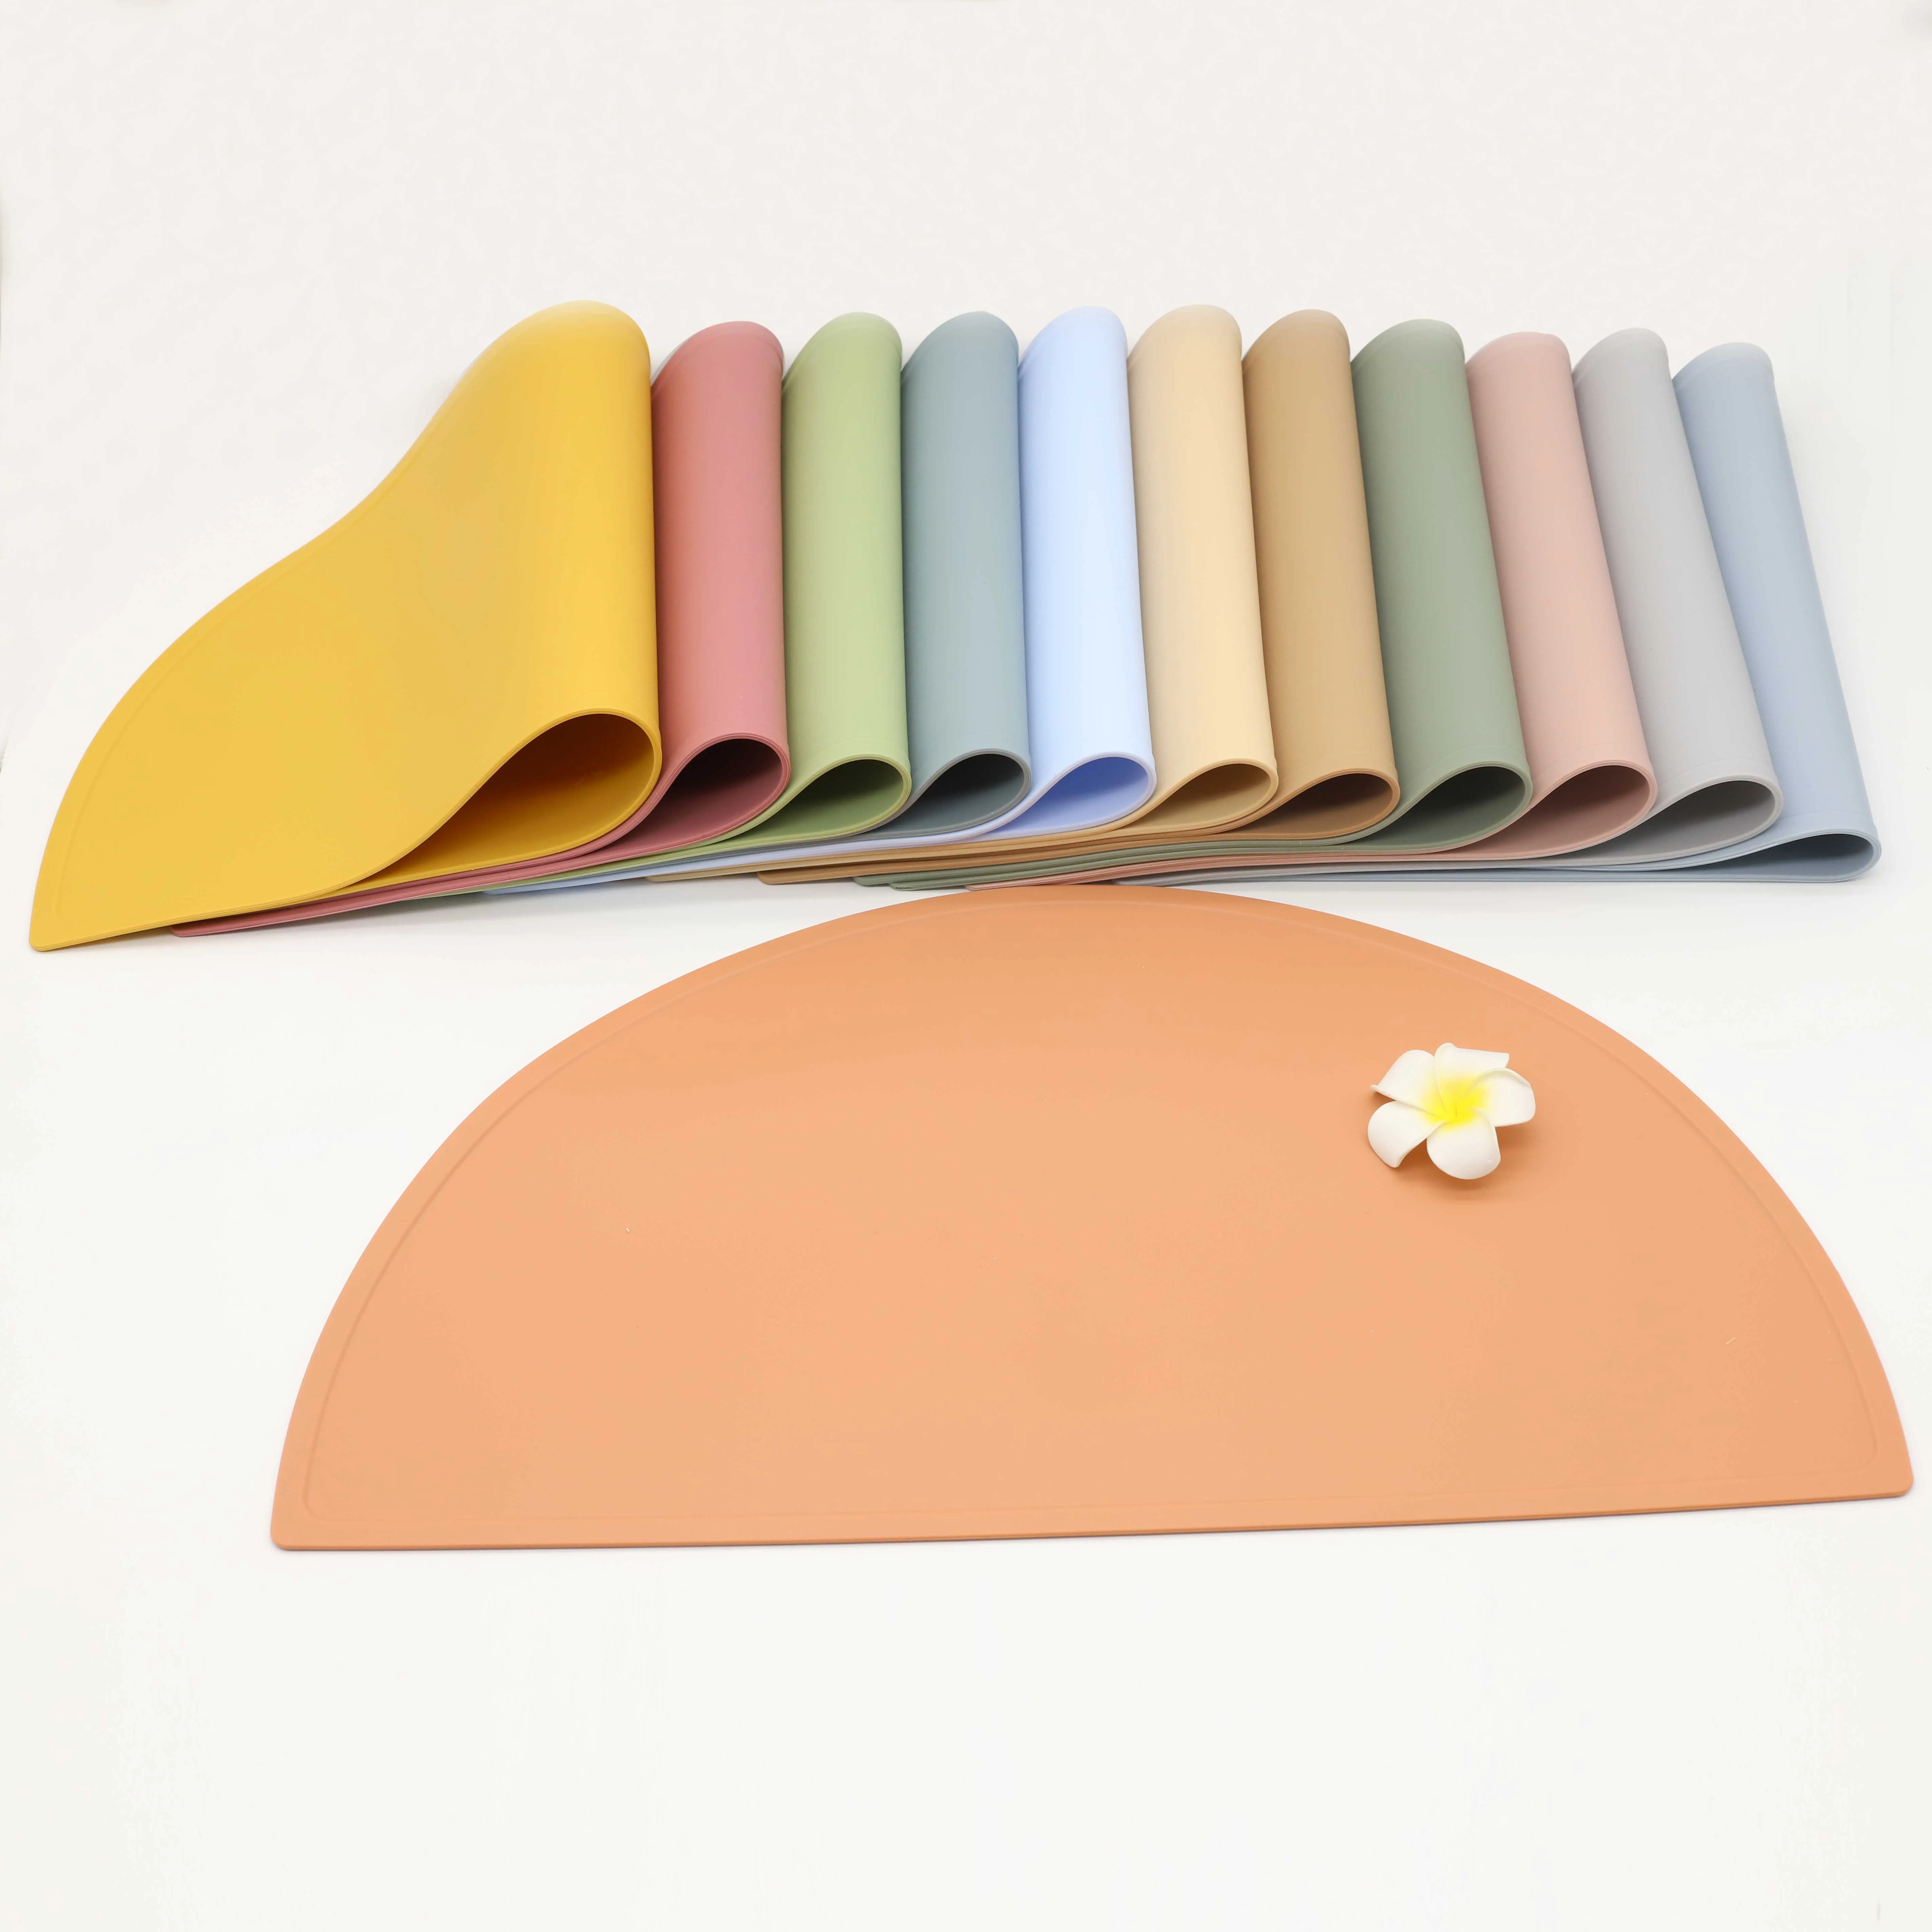 

BPA Free silicone tray mat Customize Kids Dining Table Place Baby Semicircle Shaped Non Slip Heat Resistant Silicone Placemat